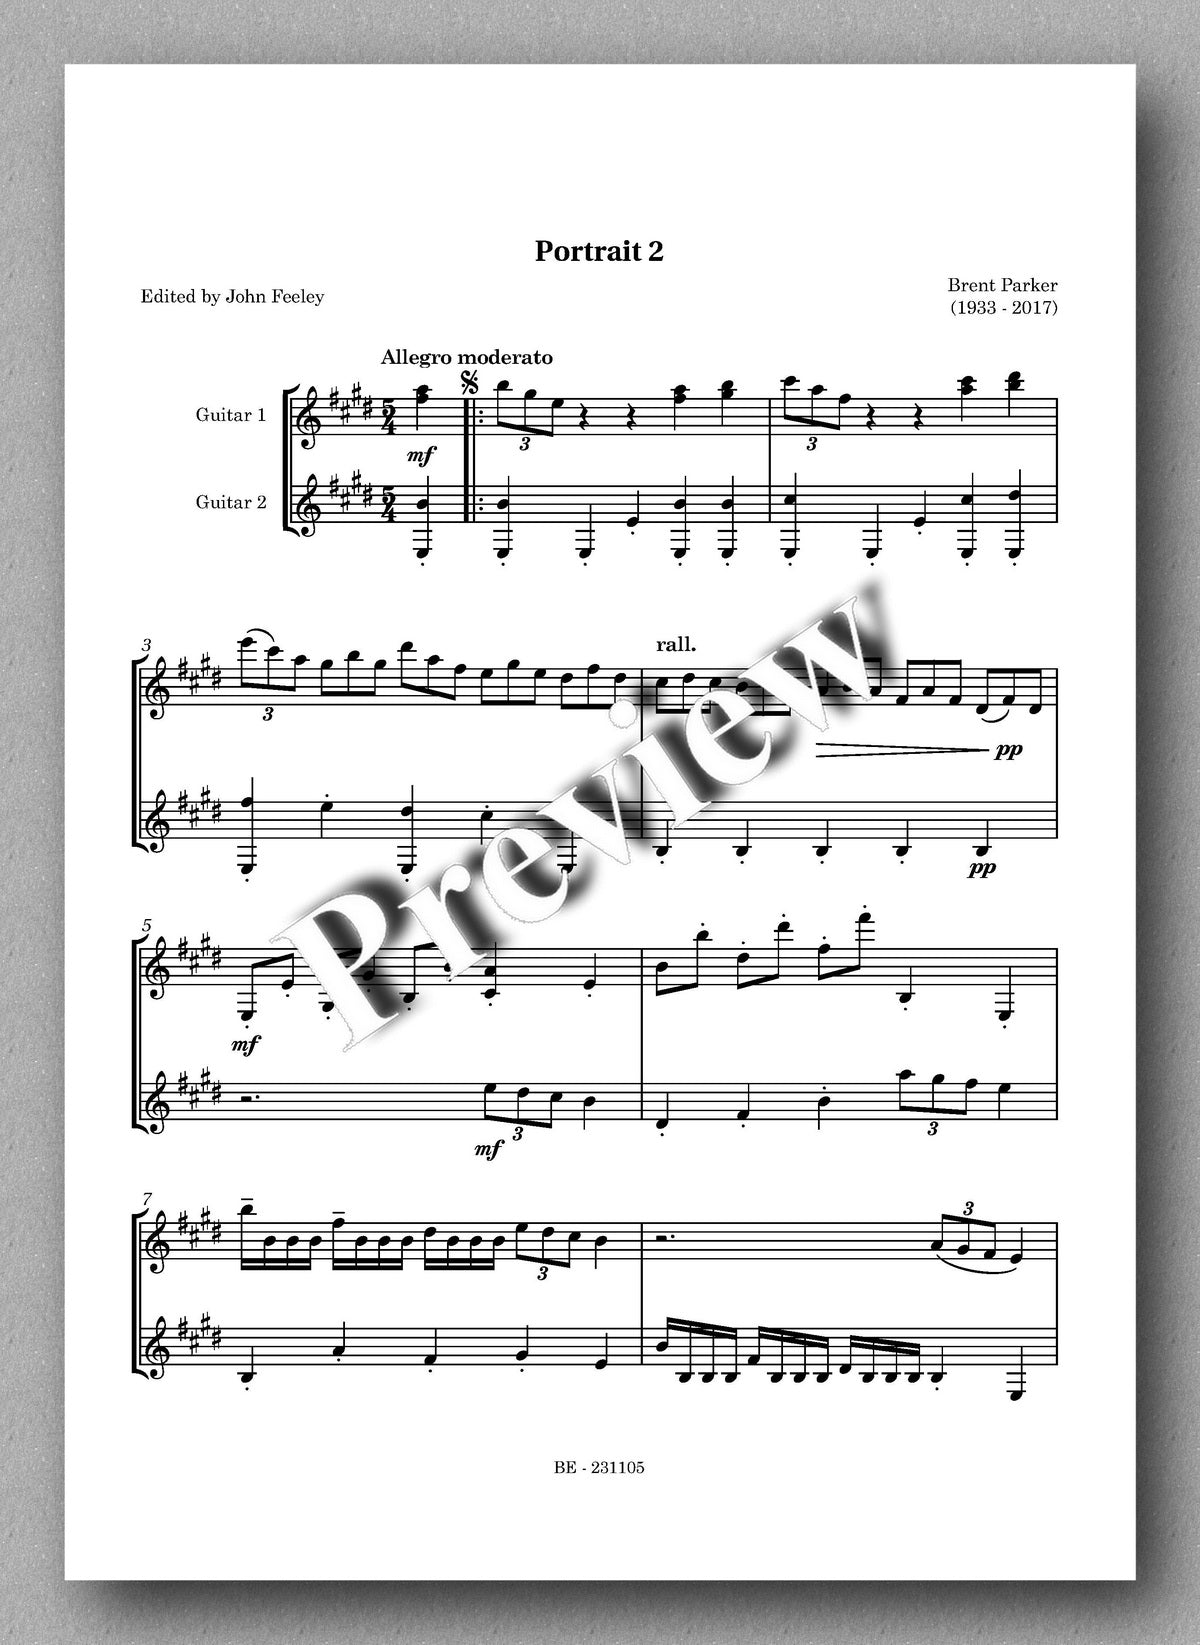 Five Portraits by Brent Parker - preview of the music score 2